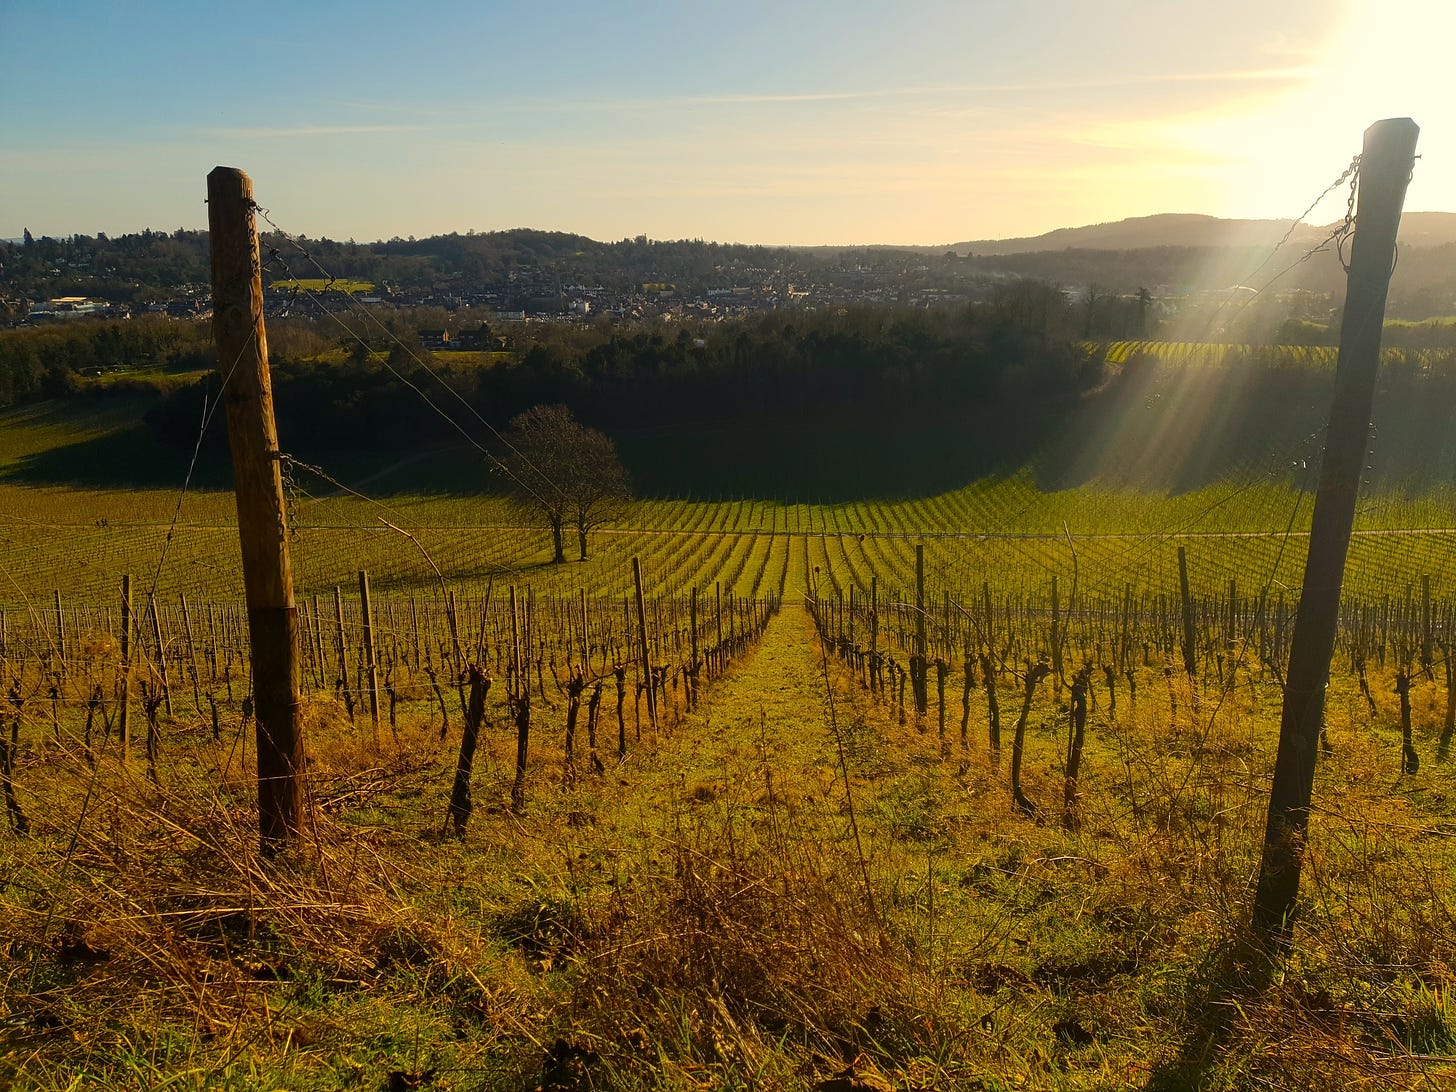 A row of vines growing in a vineyard on a sunny winter's day